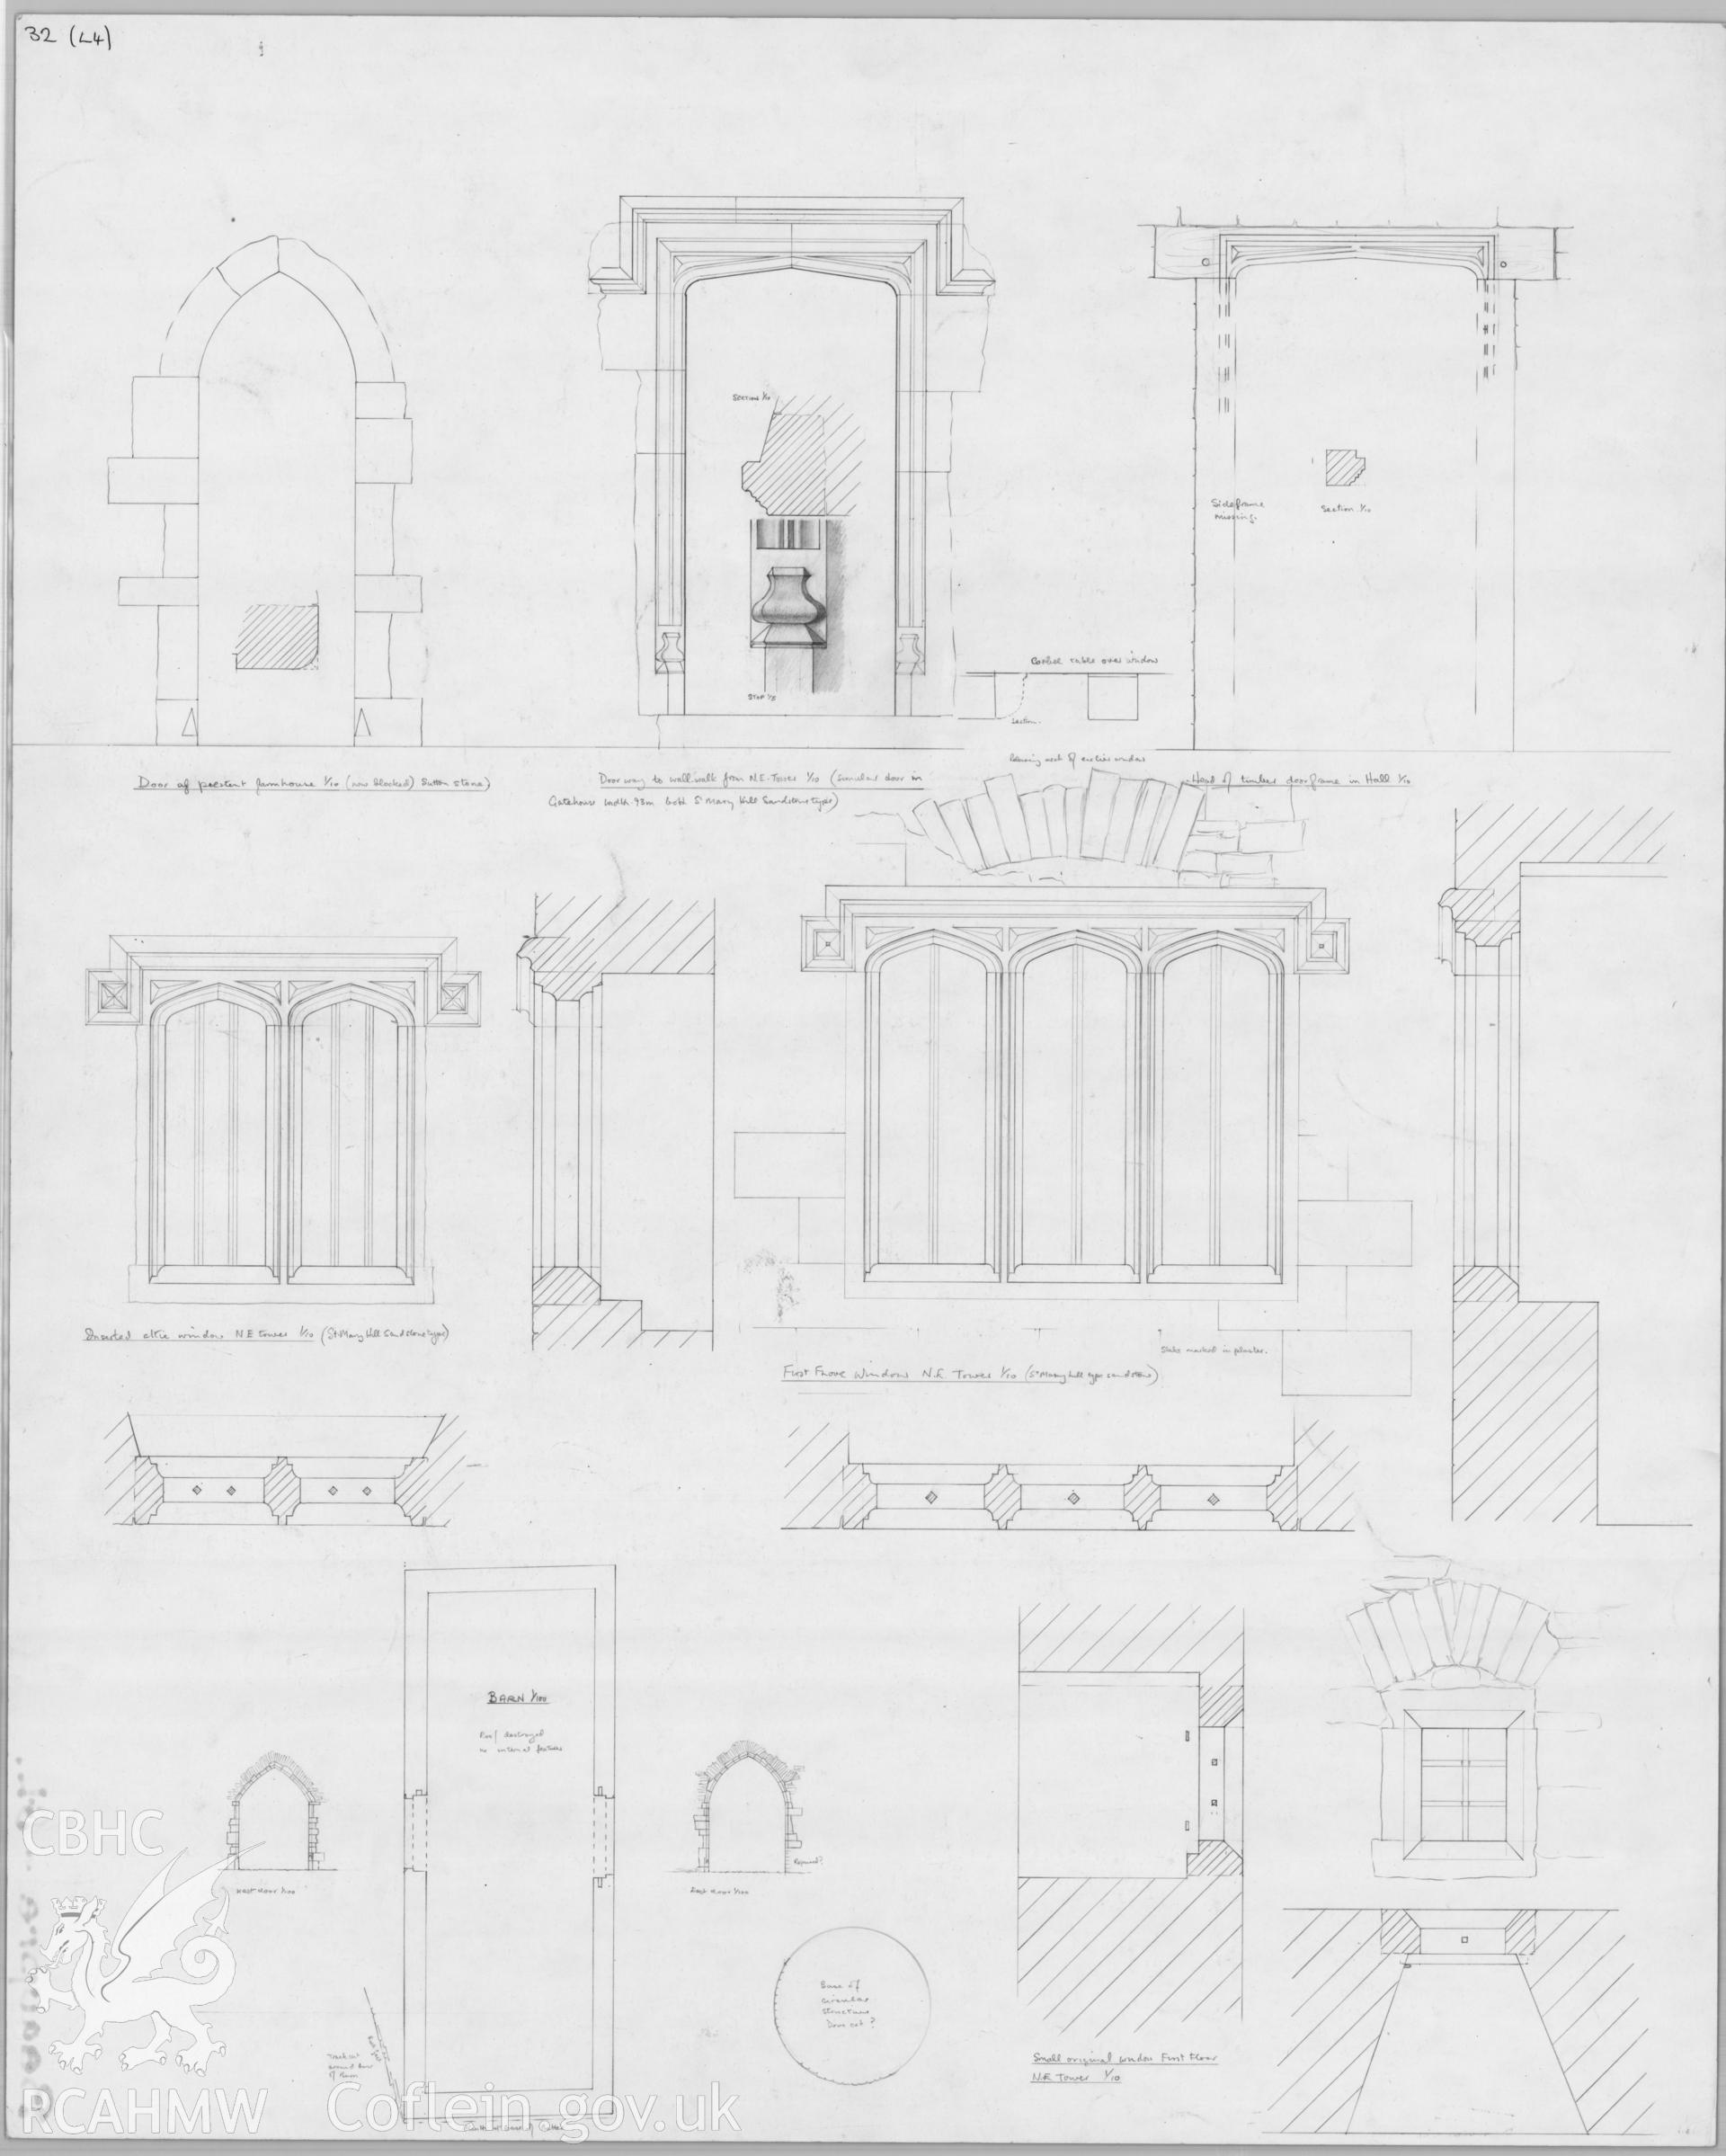 Measured pencil drawing showing doorways and windows of the north-east tower and a plan of the barn at Old Beaupre.